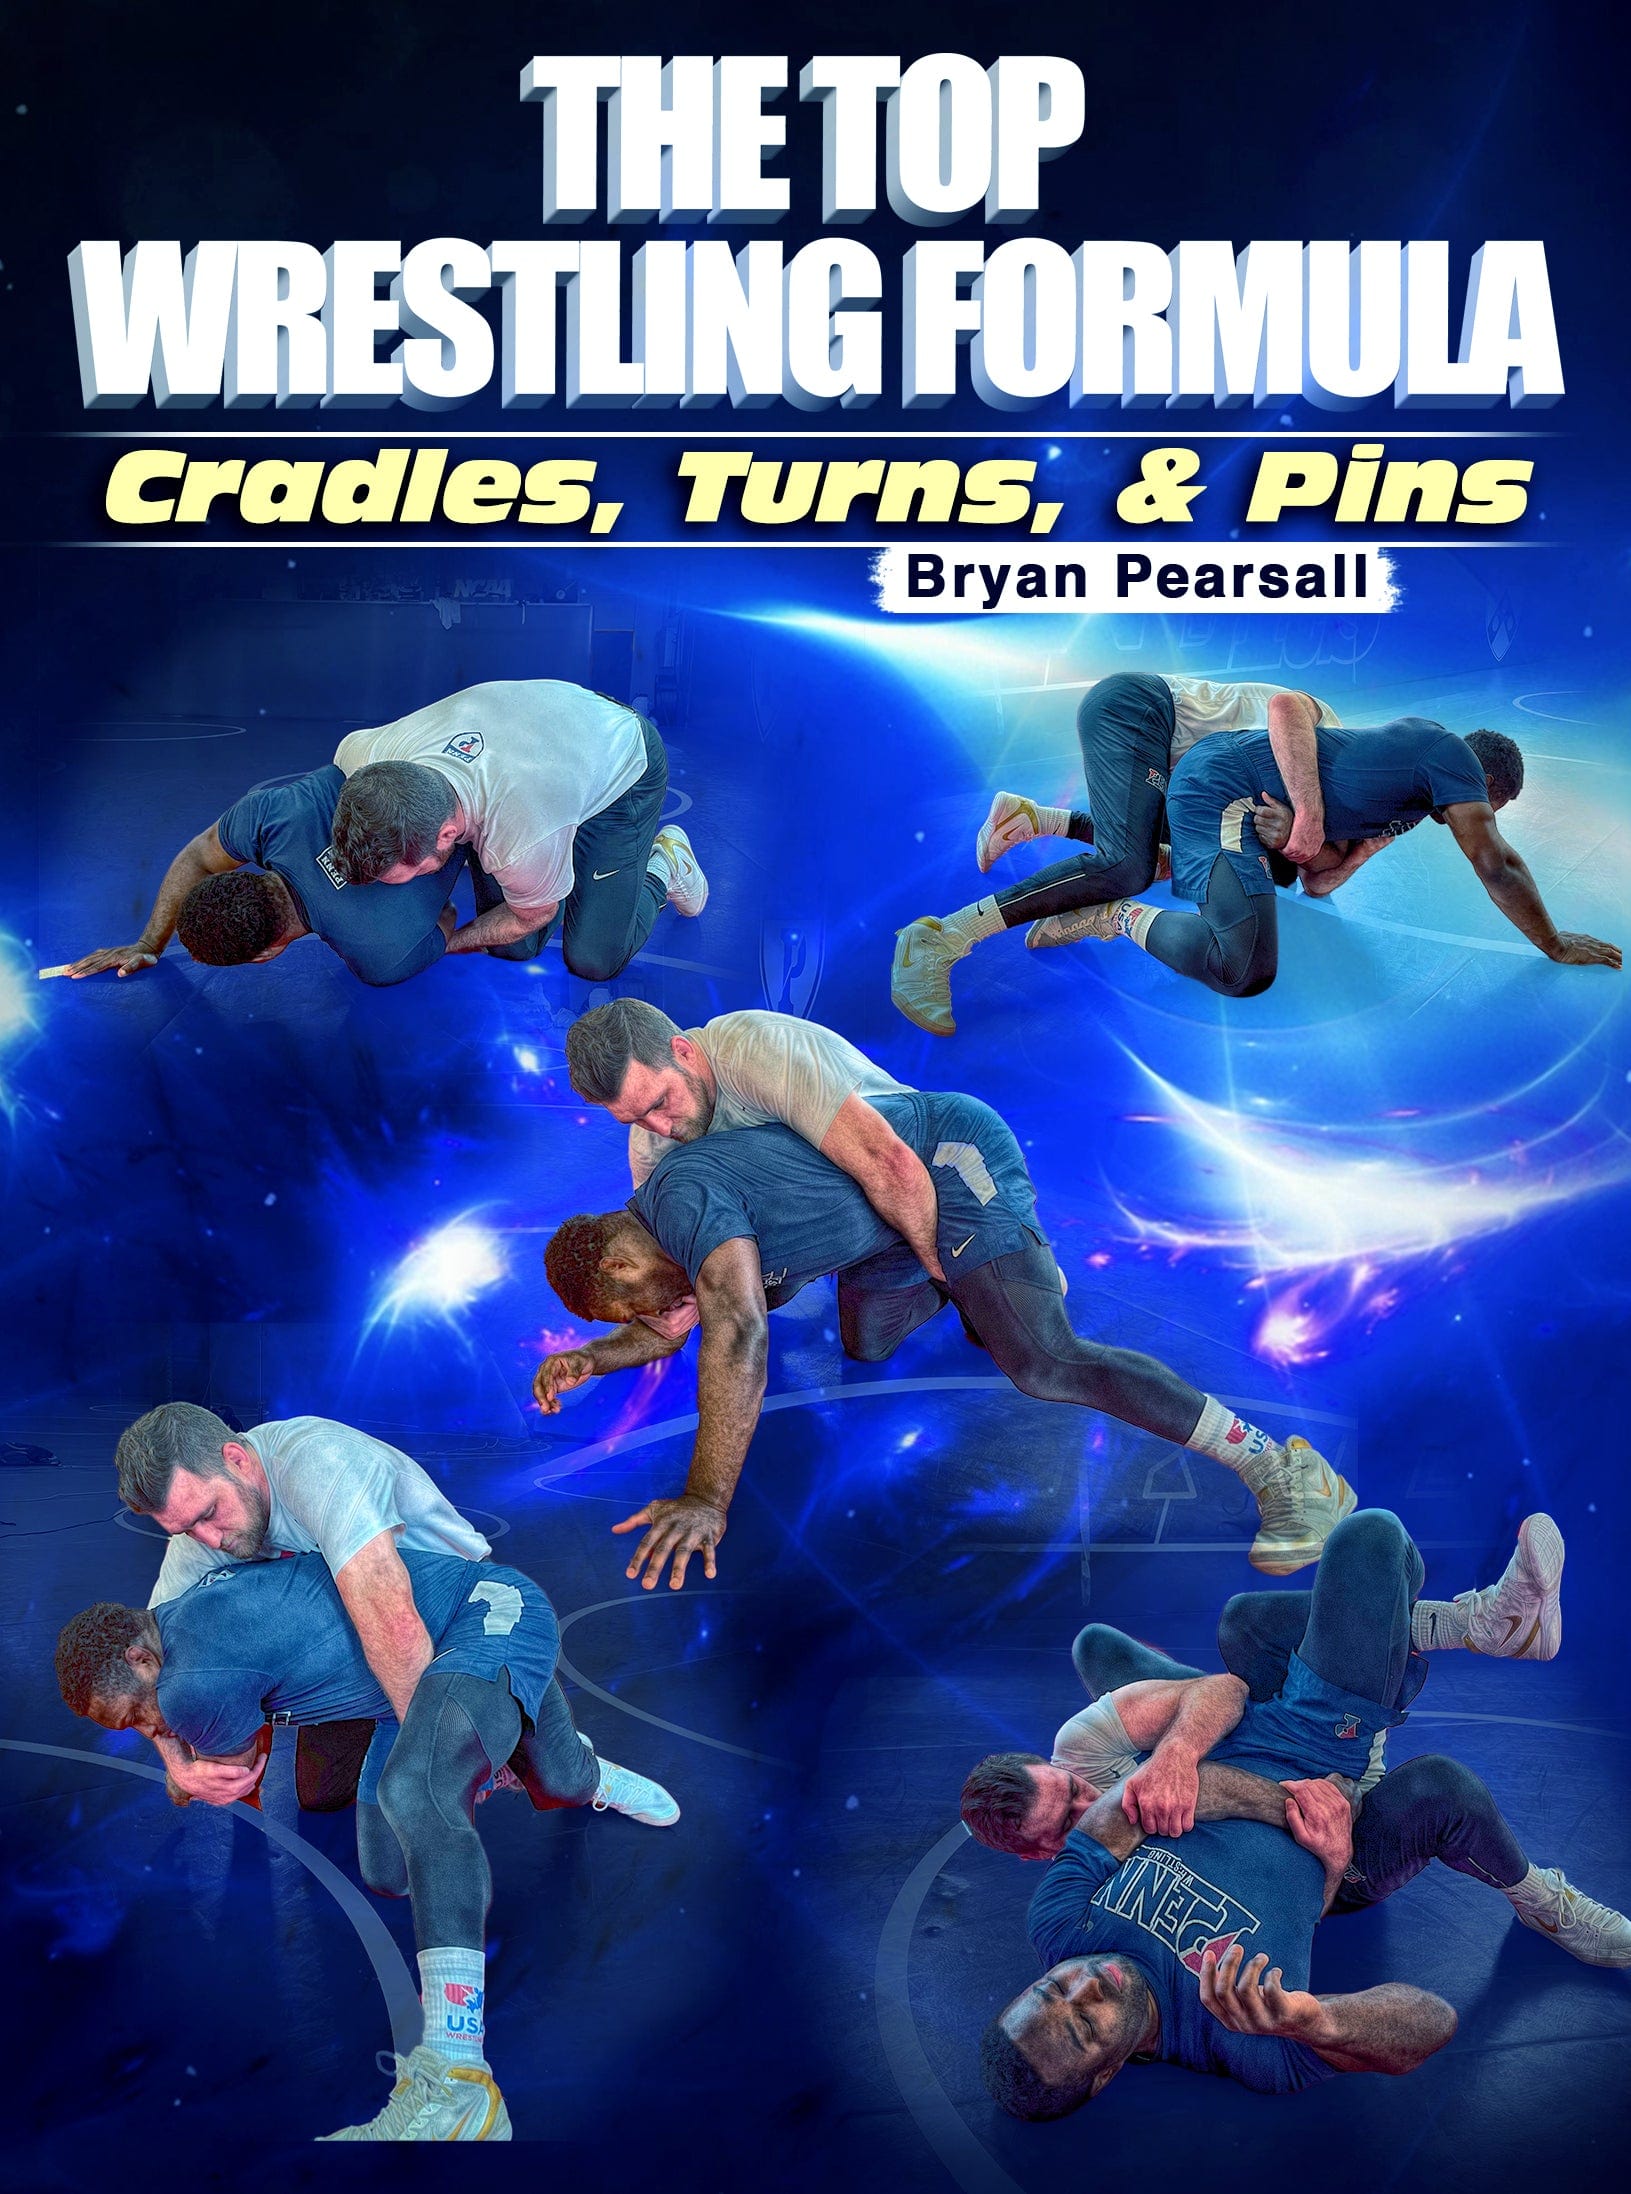 The Top Wrestling Formula by Bryan Pearsall - Fanatic Wrestling